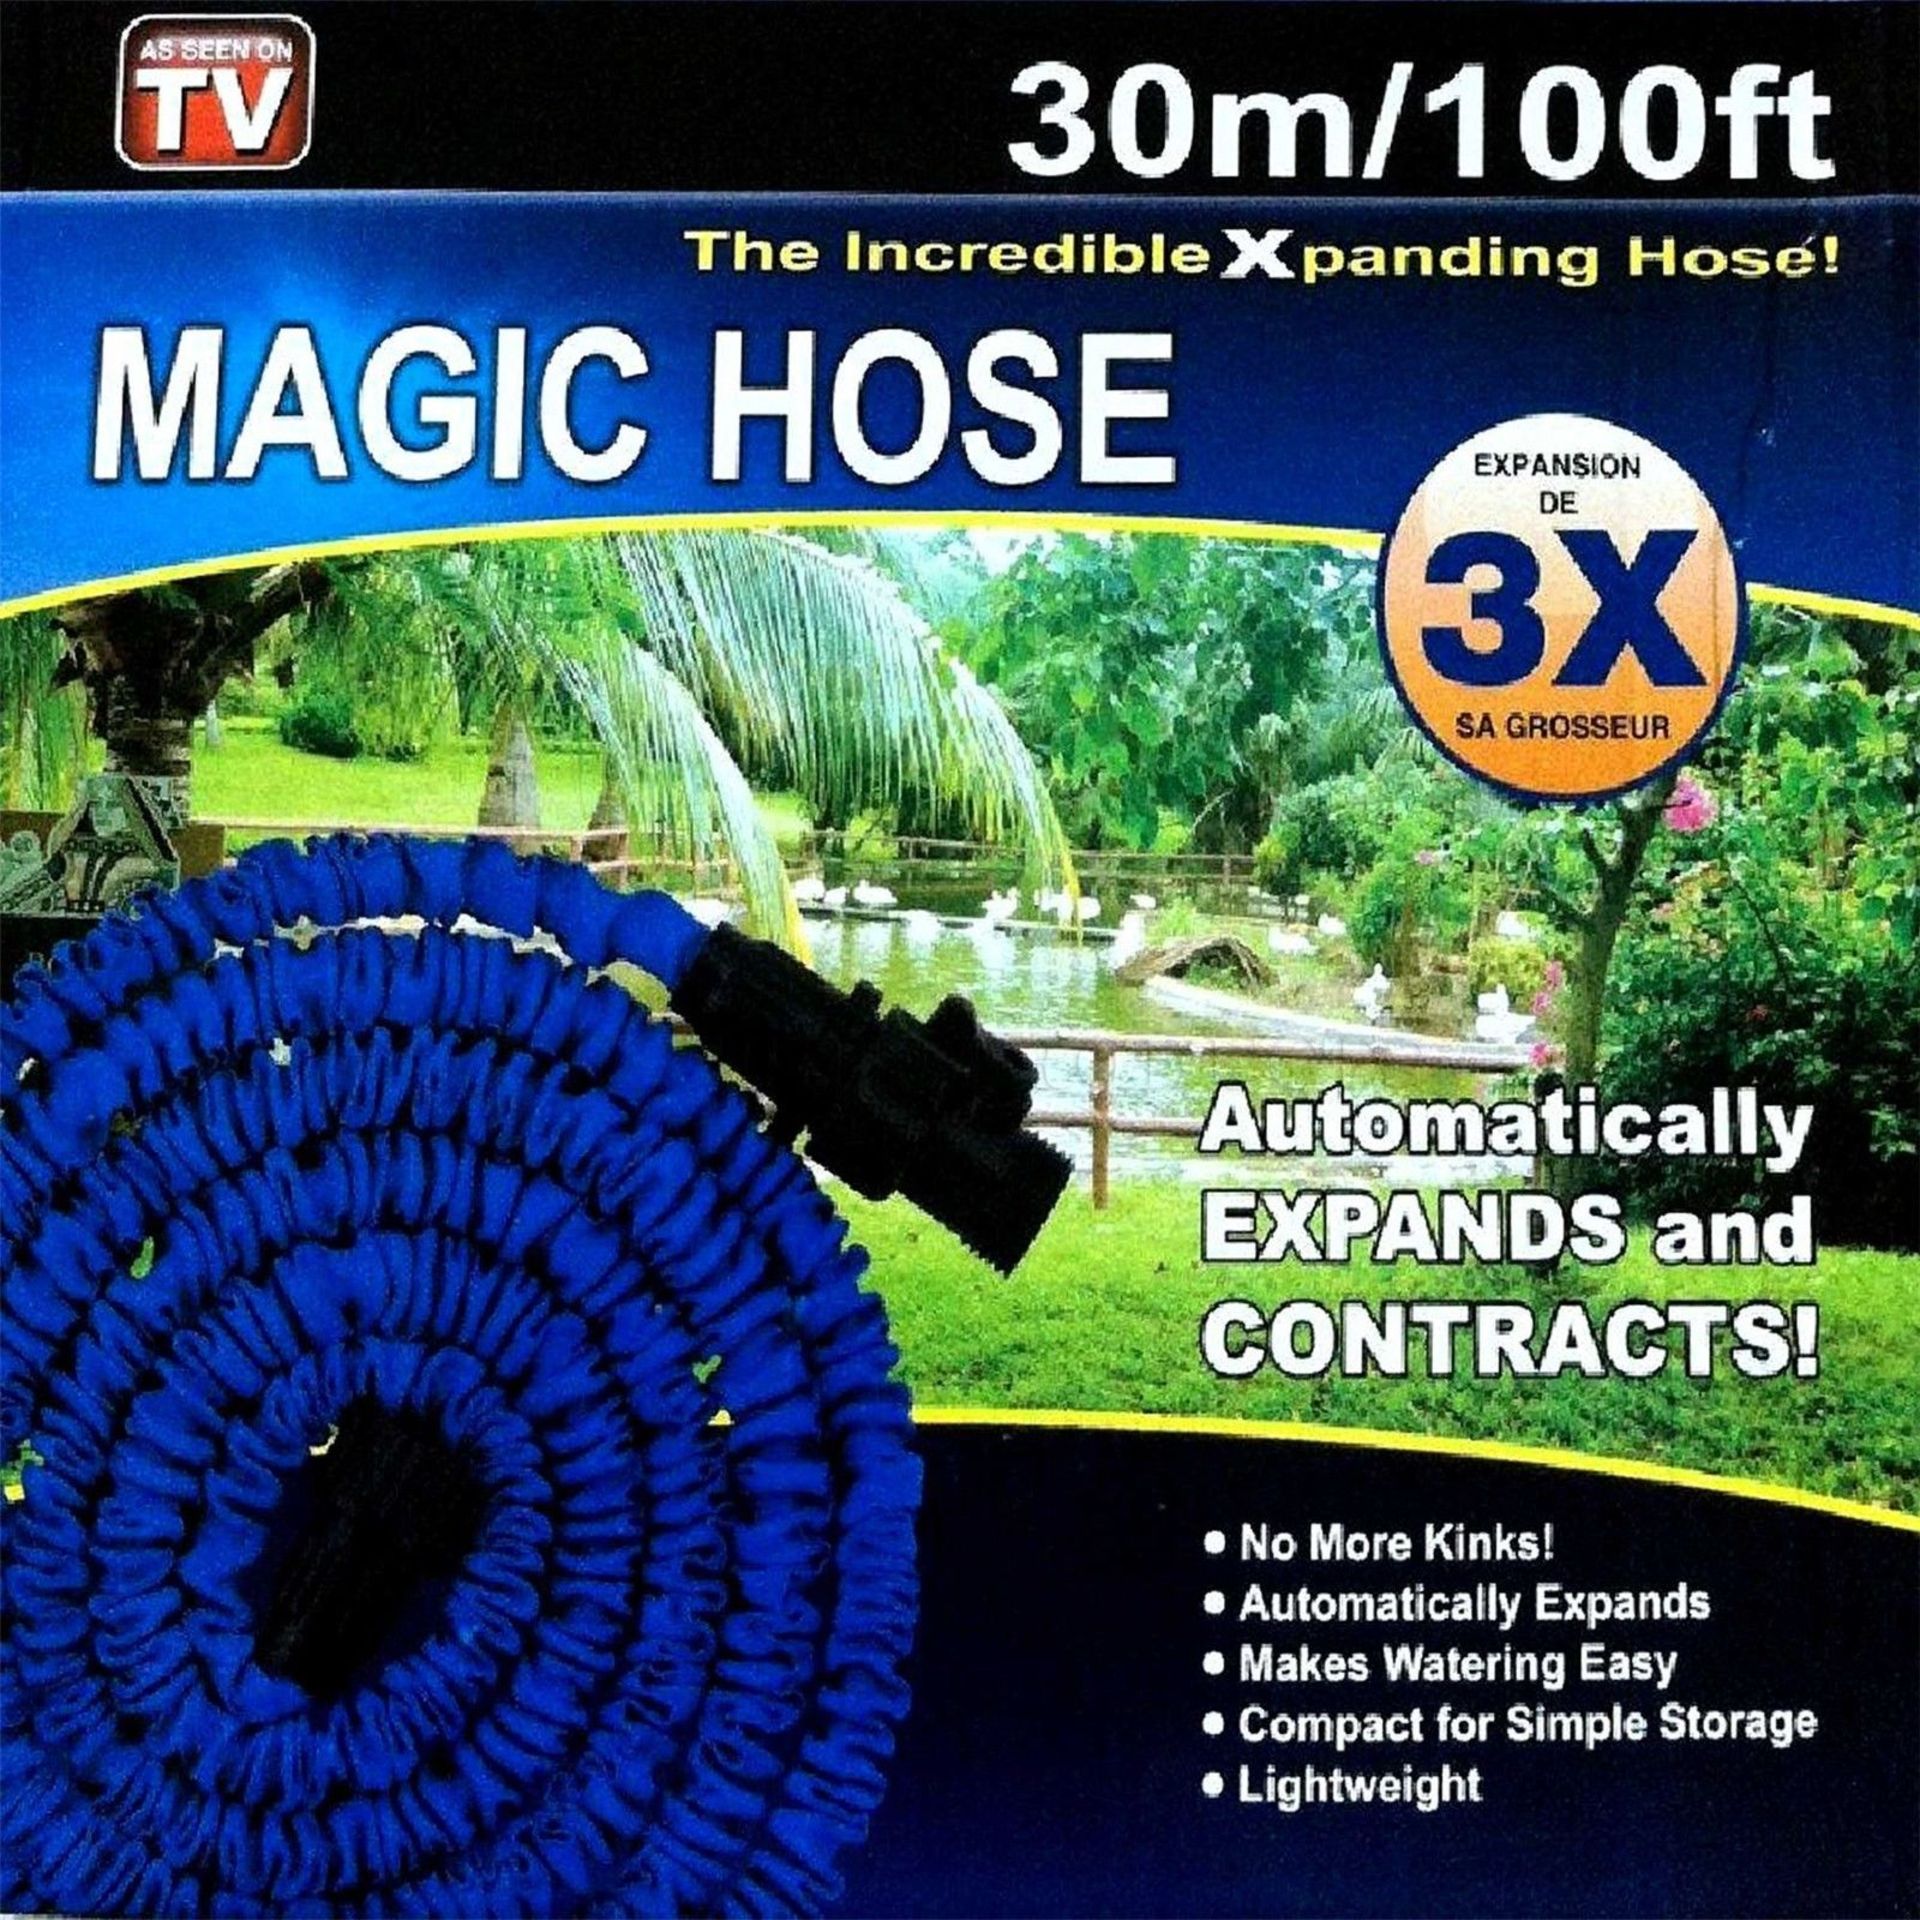 V Brand New 100 Foot (30 Metre) Incredible Magic Hose (As Seen On TV) - RRP 79 Euros - Automatically